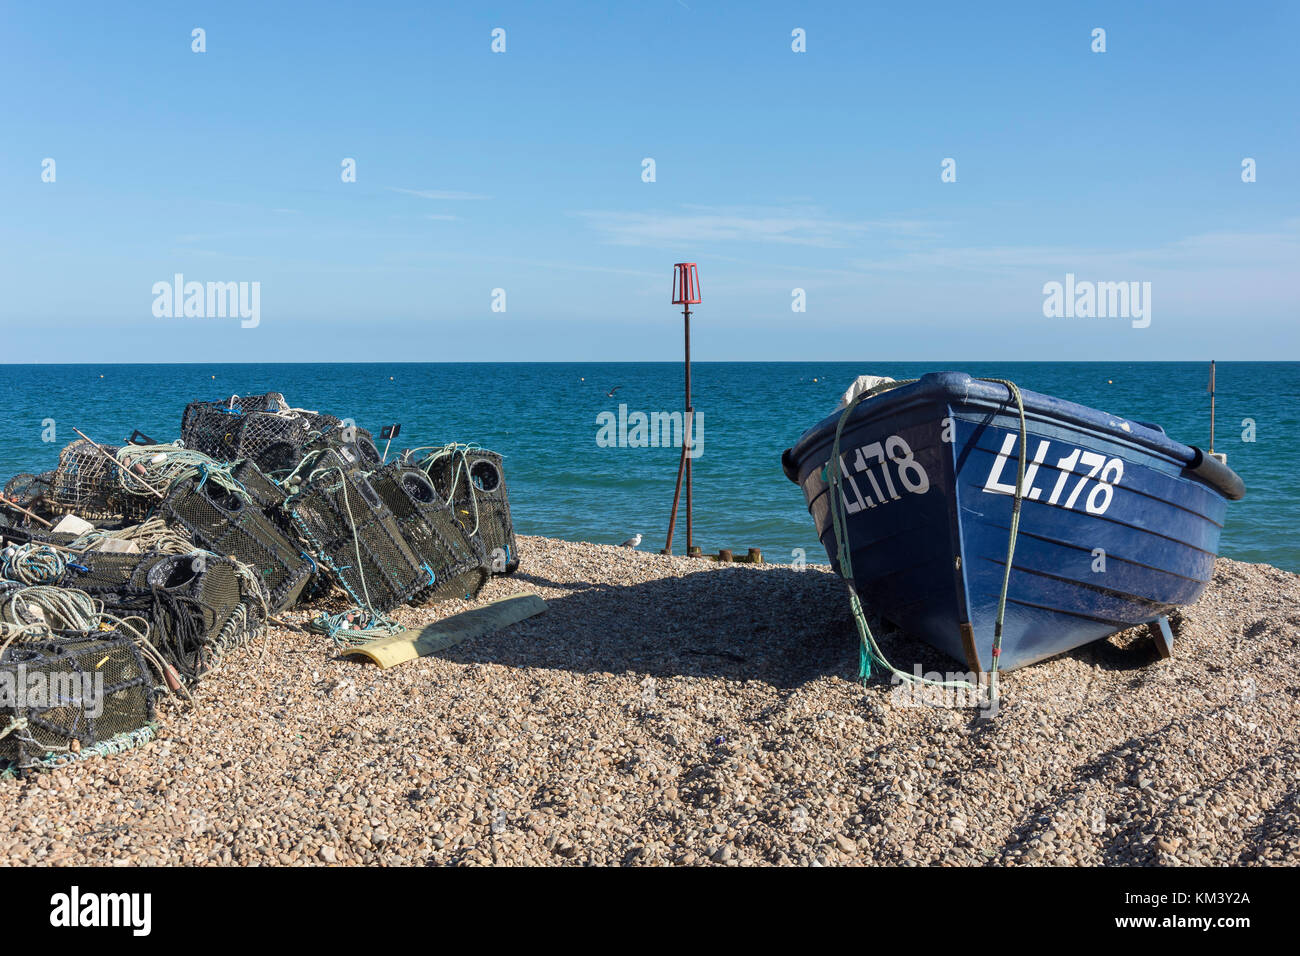 Fishing boat and lobster pots on beach, Bognor Regis, West Sussex, England, United Kingdom Stock Photo